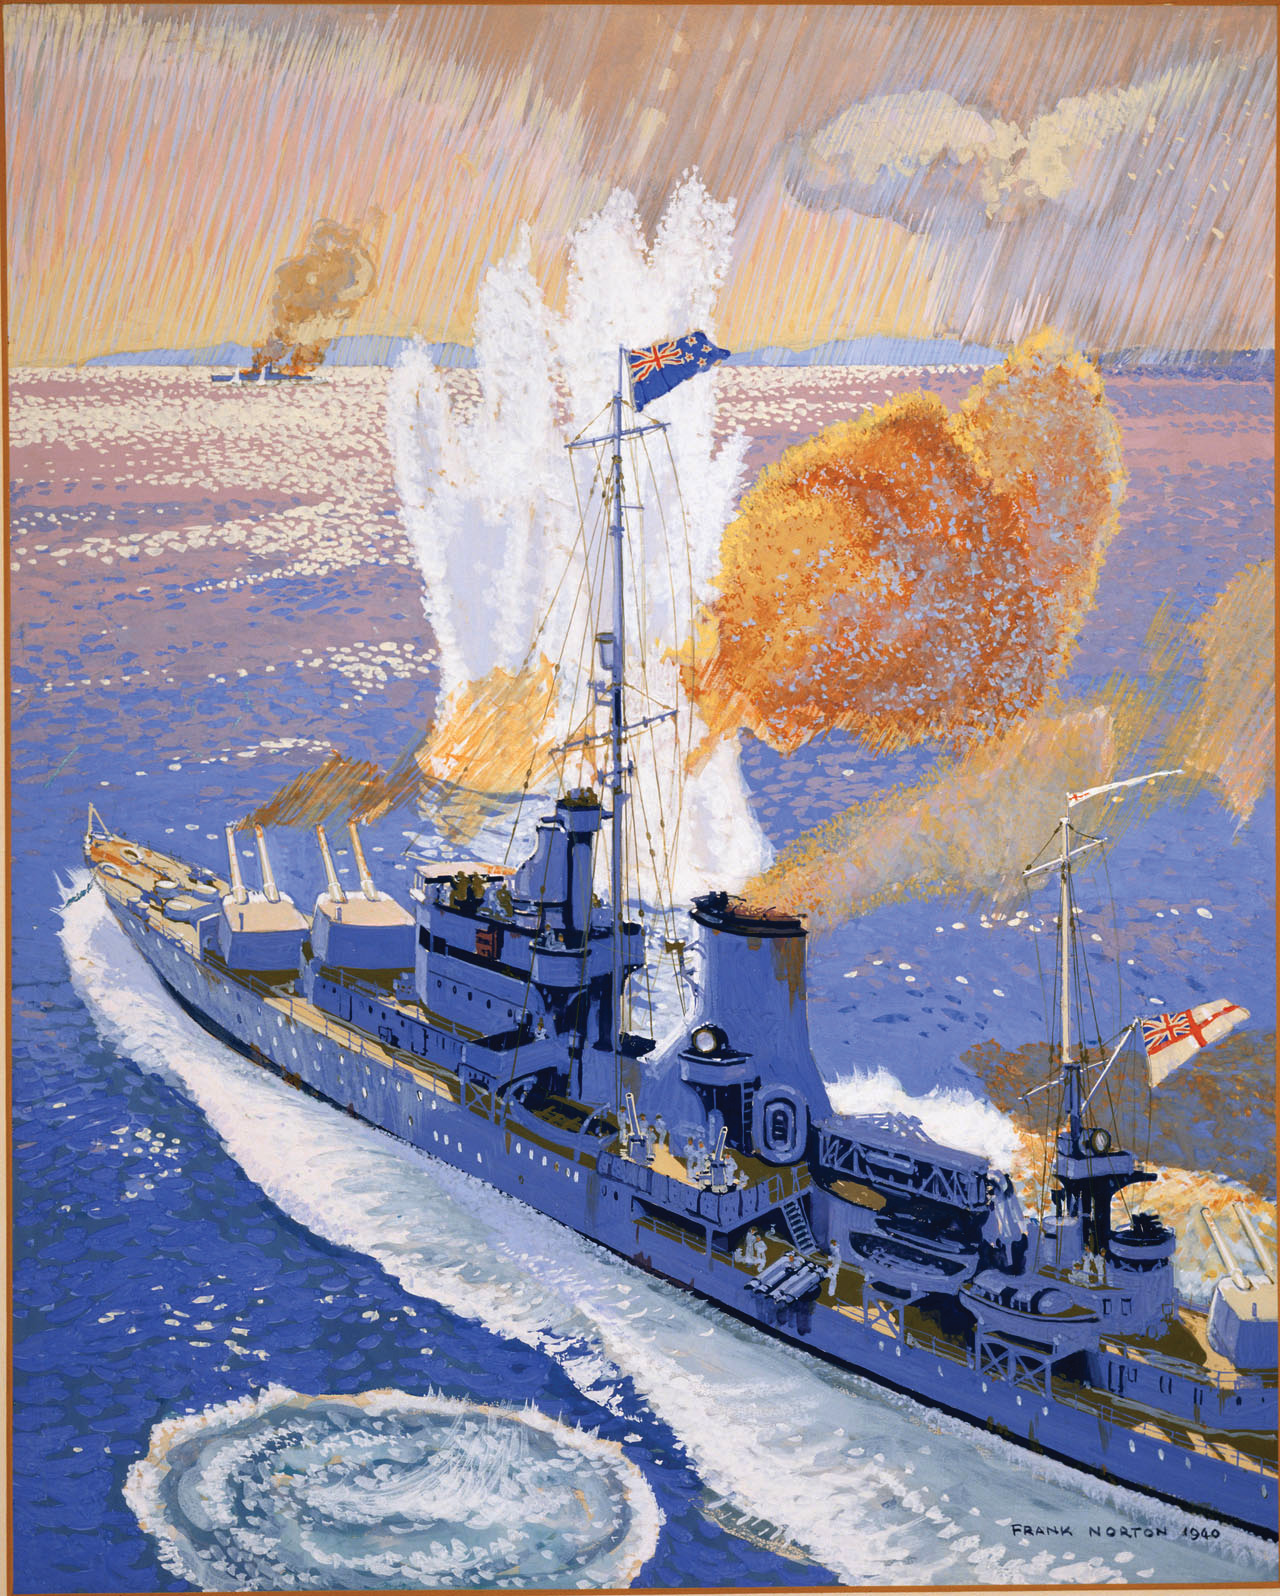 In this painting of the Battle of the River Plate, a towering geyser rises from the Atlantic Ocean after a near miss from the 11-inch guns of the German pocket battleship Graf Spee falls close to the cruiser Achilles. 